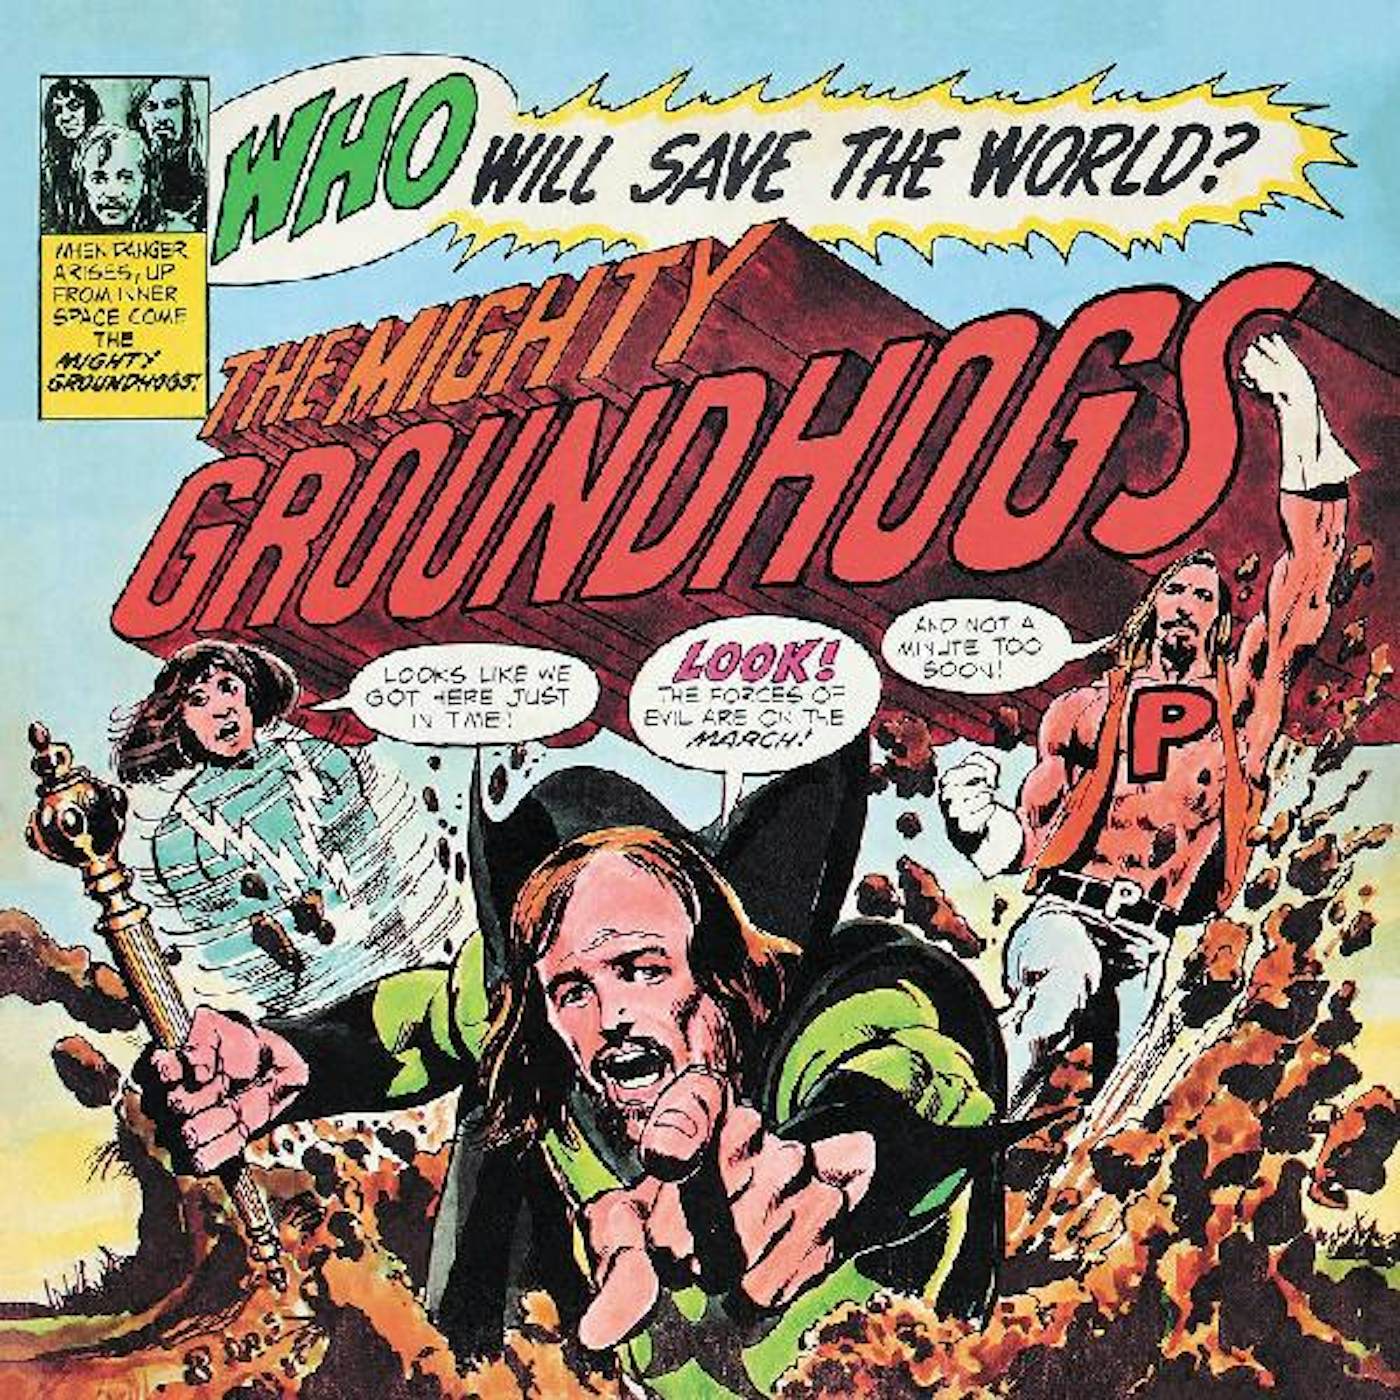 The Groundhogs WHO WILL SAVE THE WORLD CD